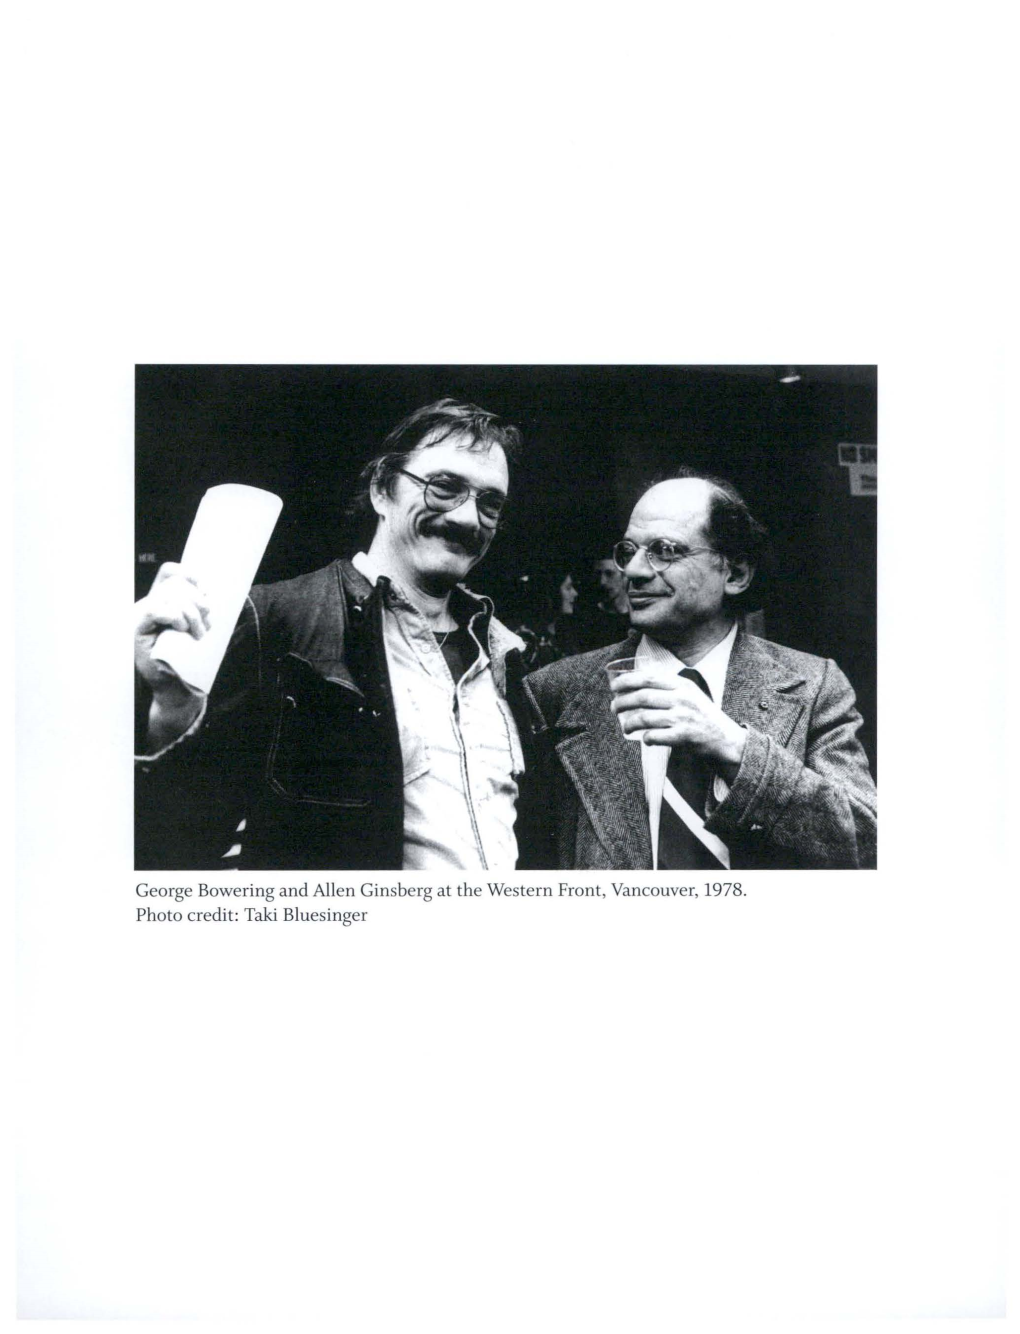 George Bowering and Allen Ginsberg at the Western Front, Vancouver, 1978